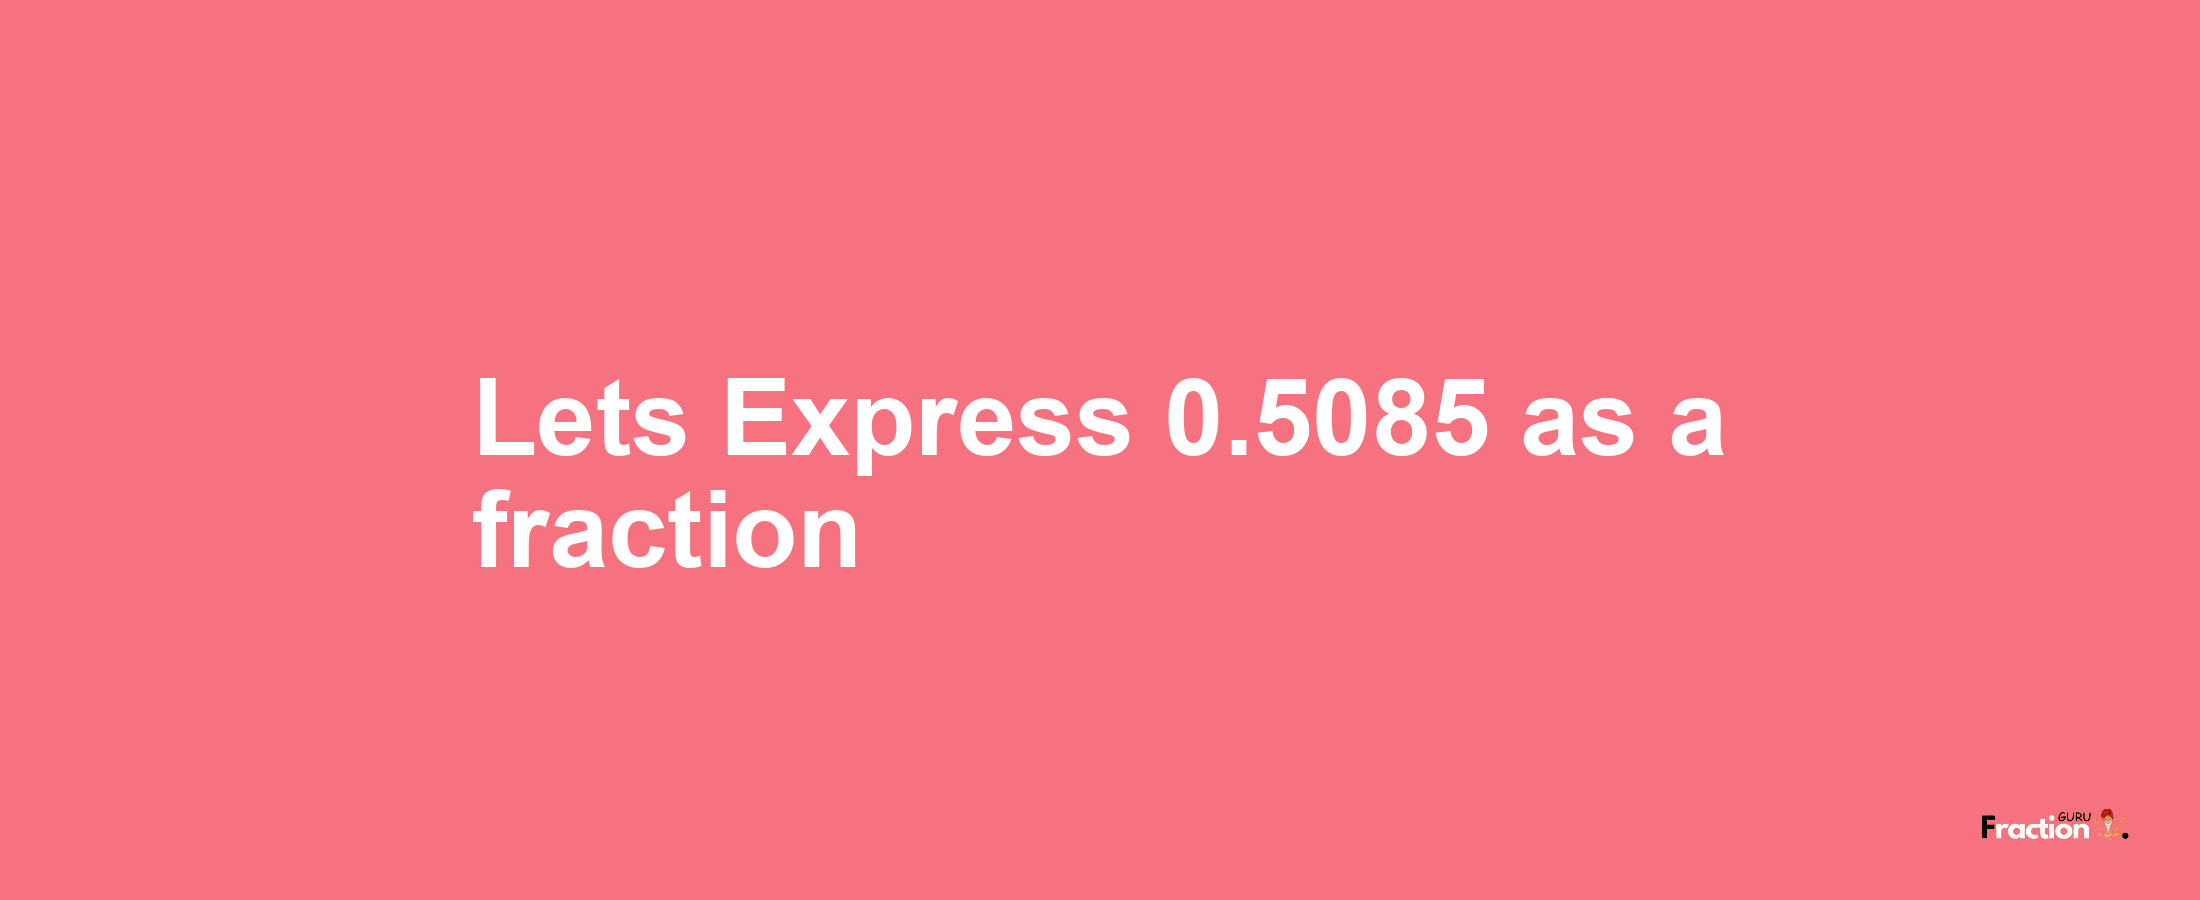 Lets Express 0.5085 as afraction